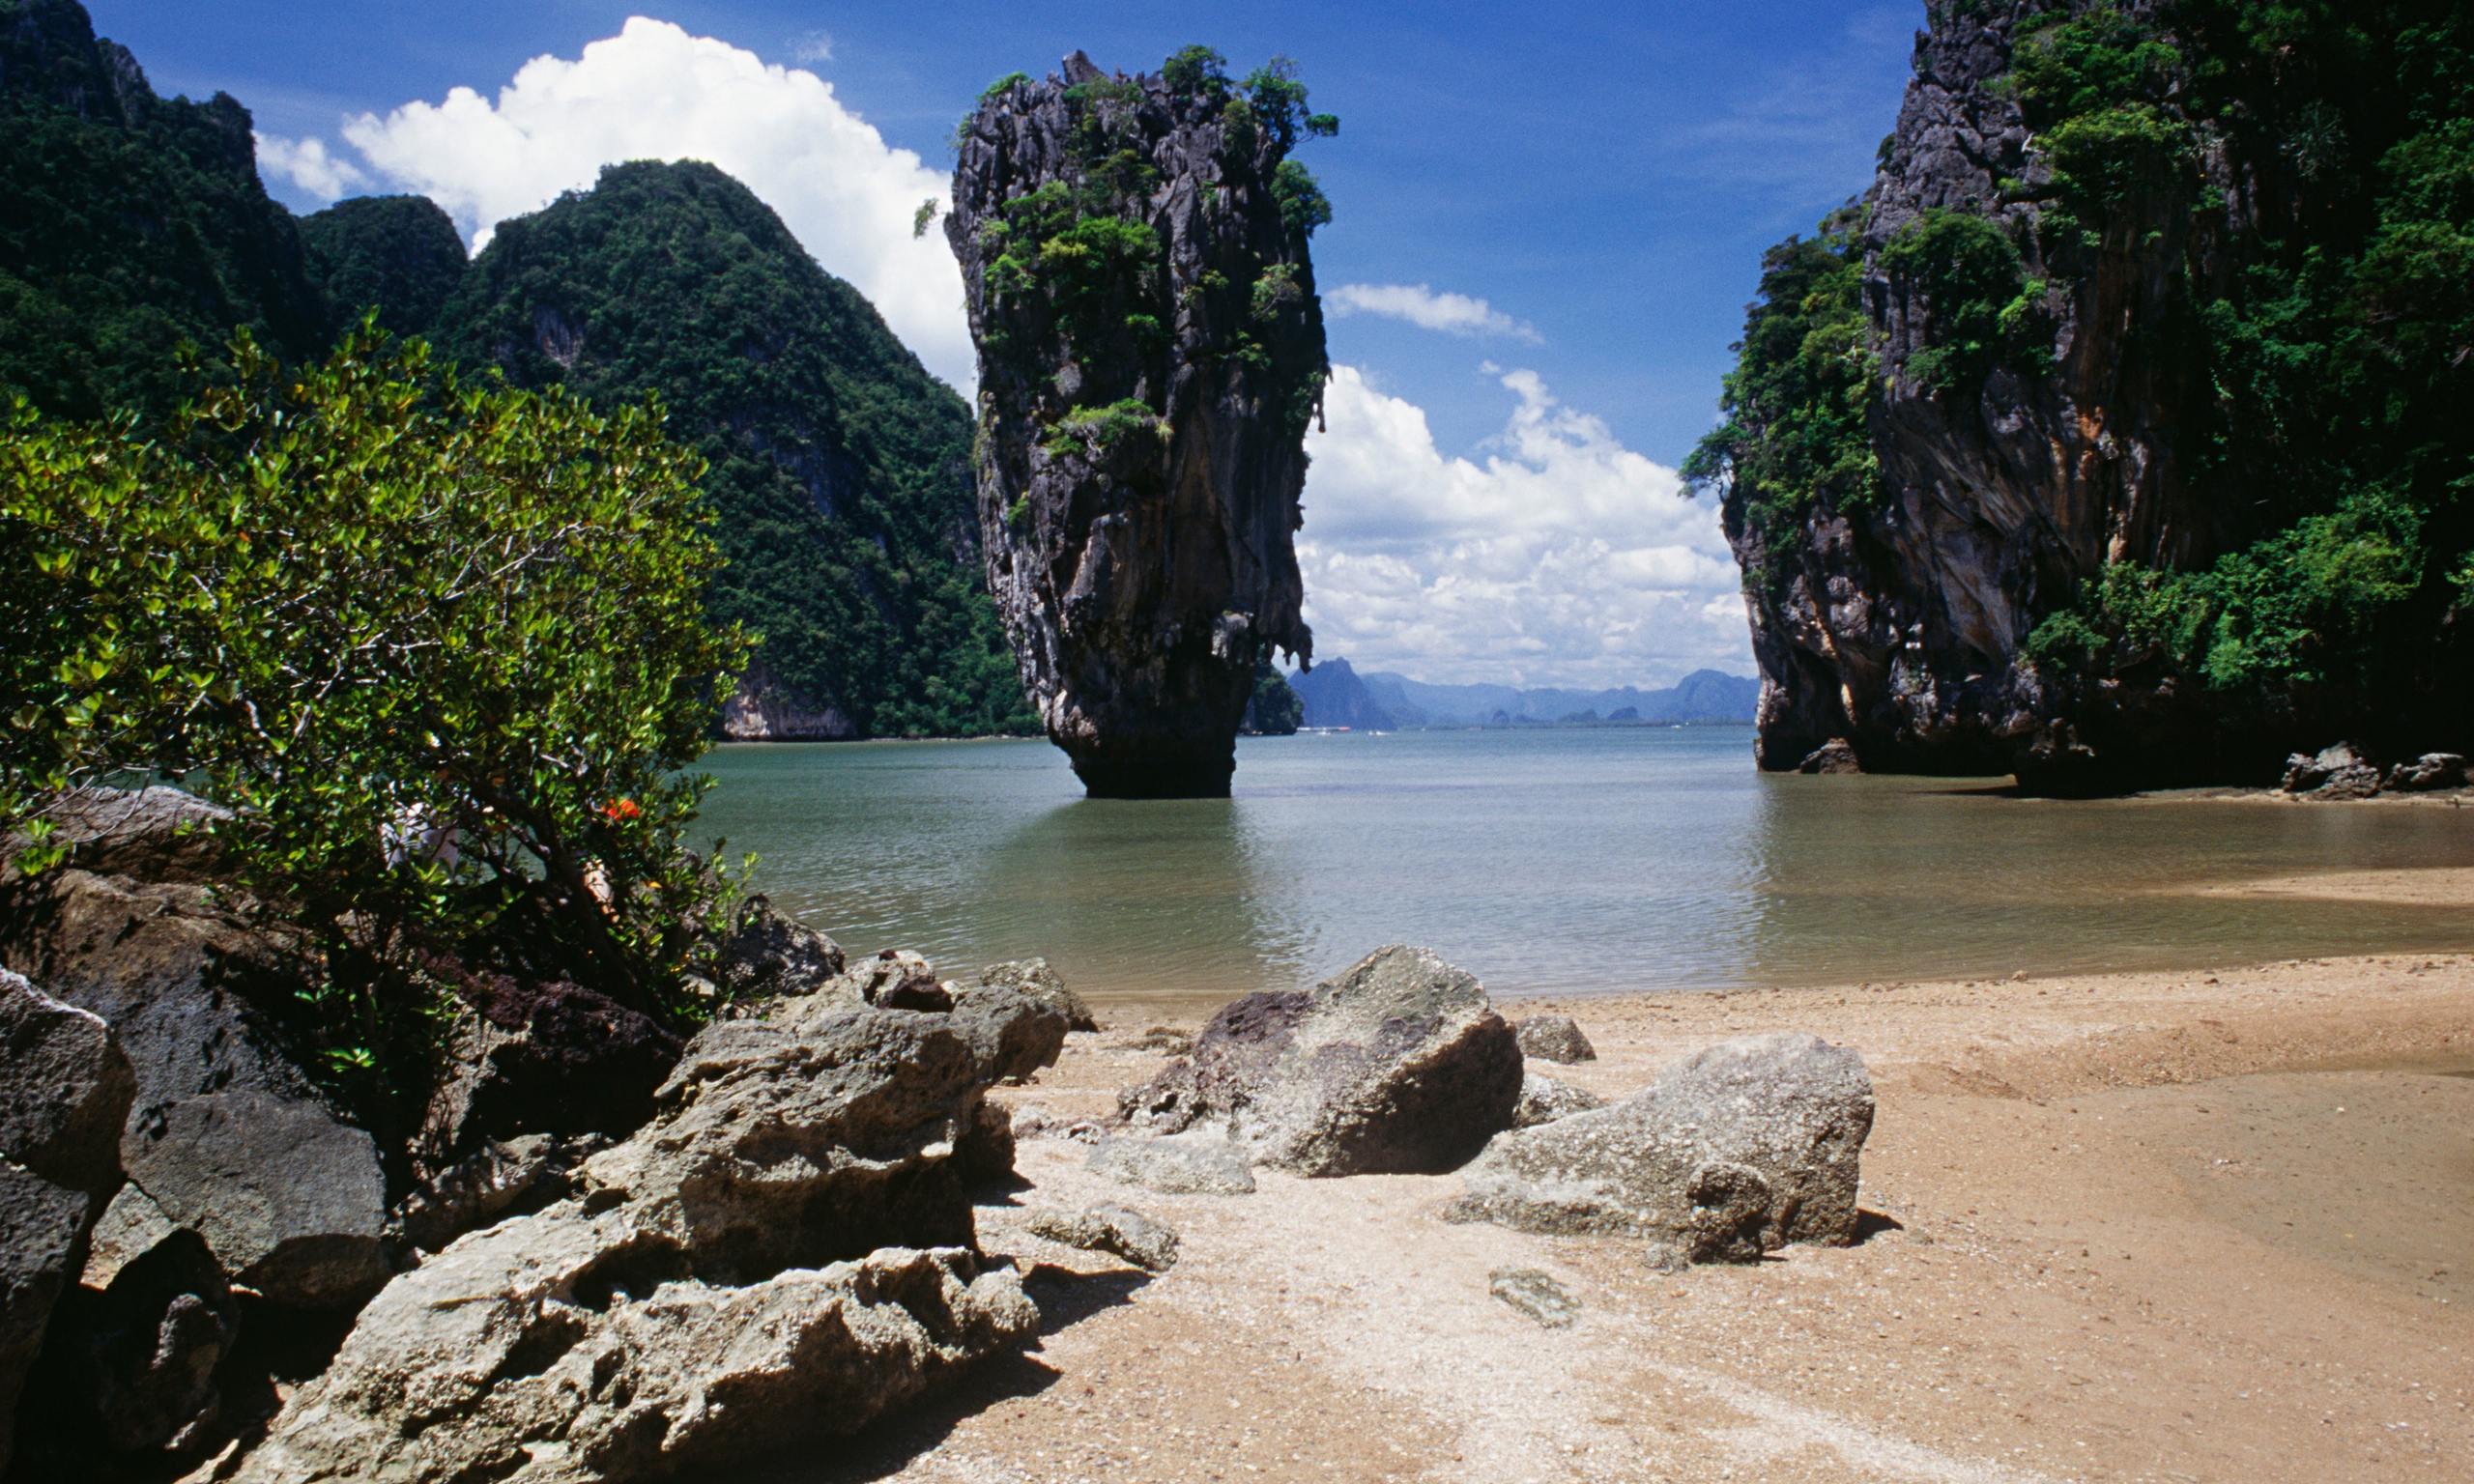 Thailand tour in two weeks: holiday itinerary | Travel | theguardian.com